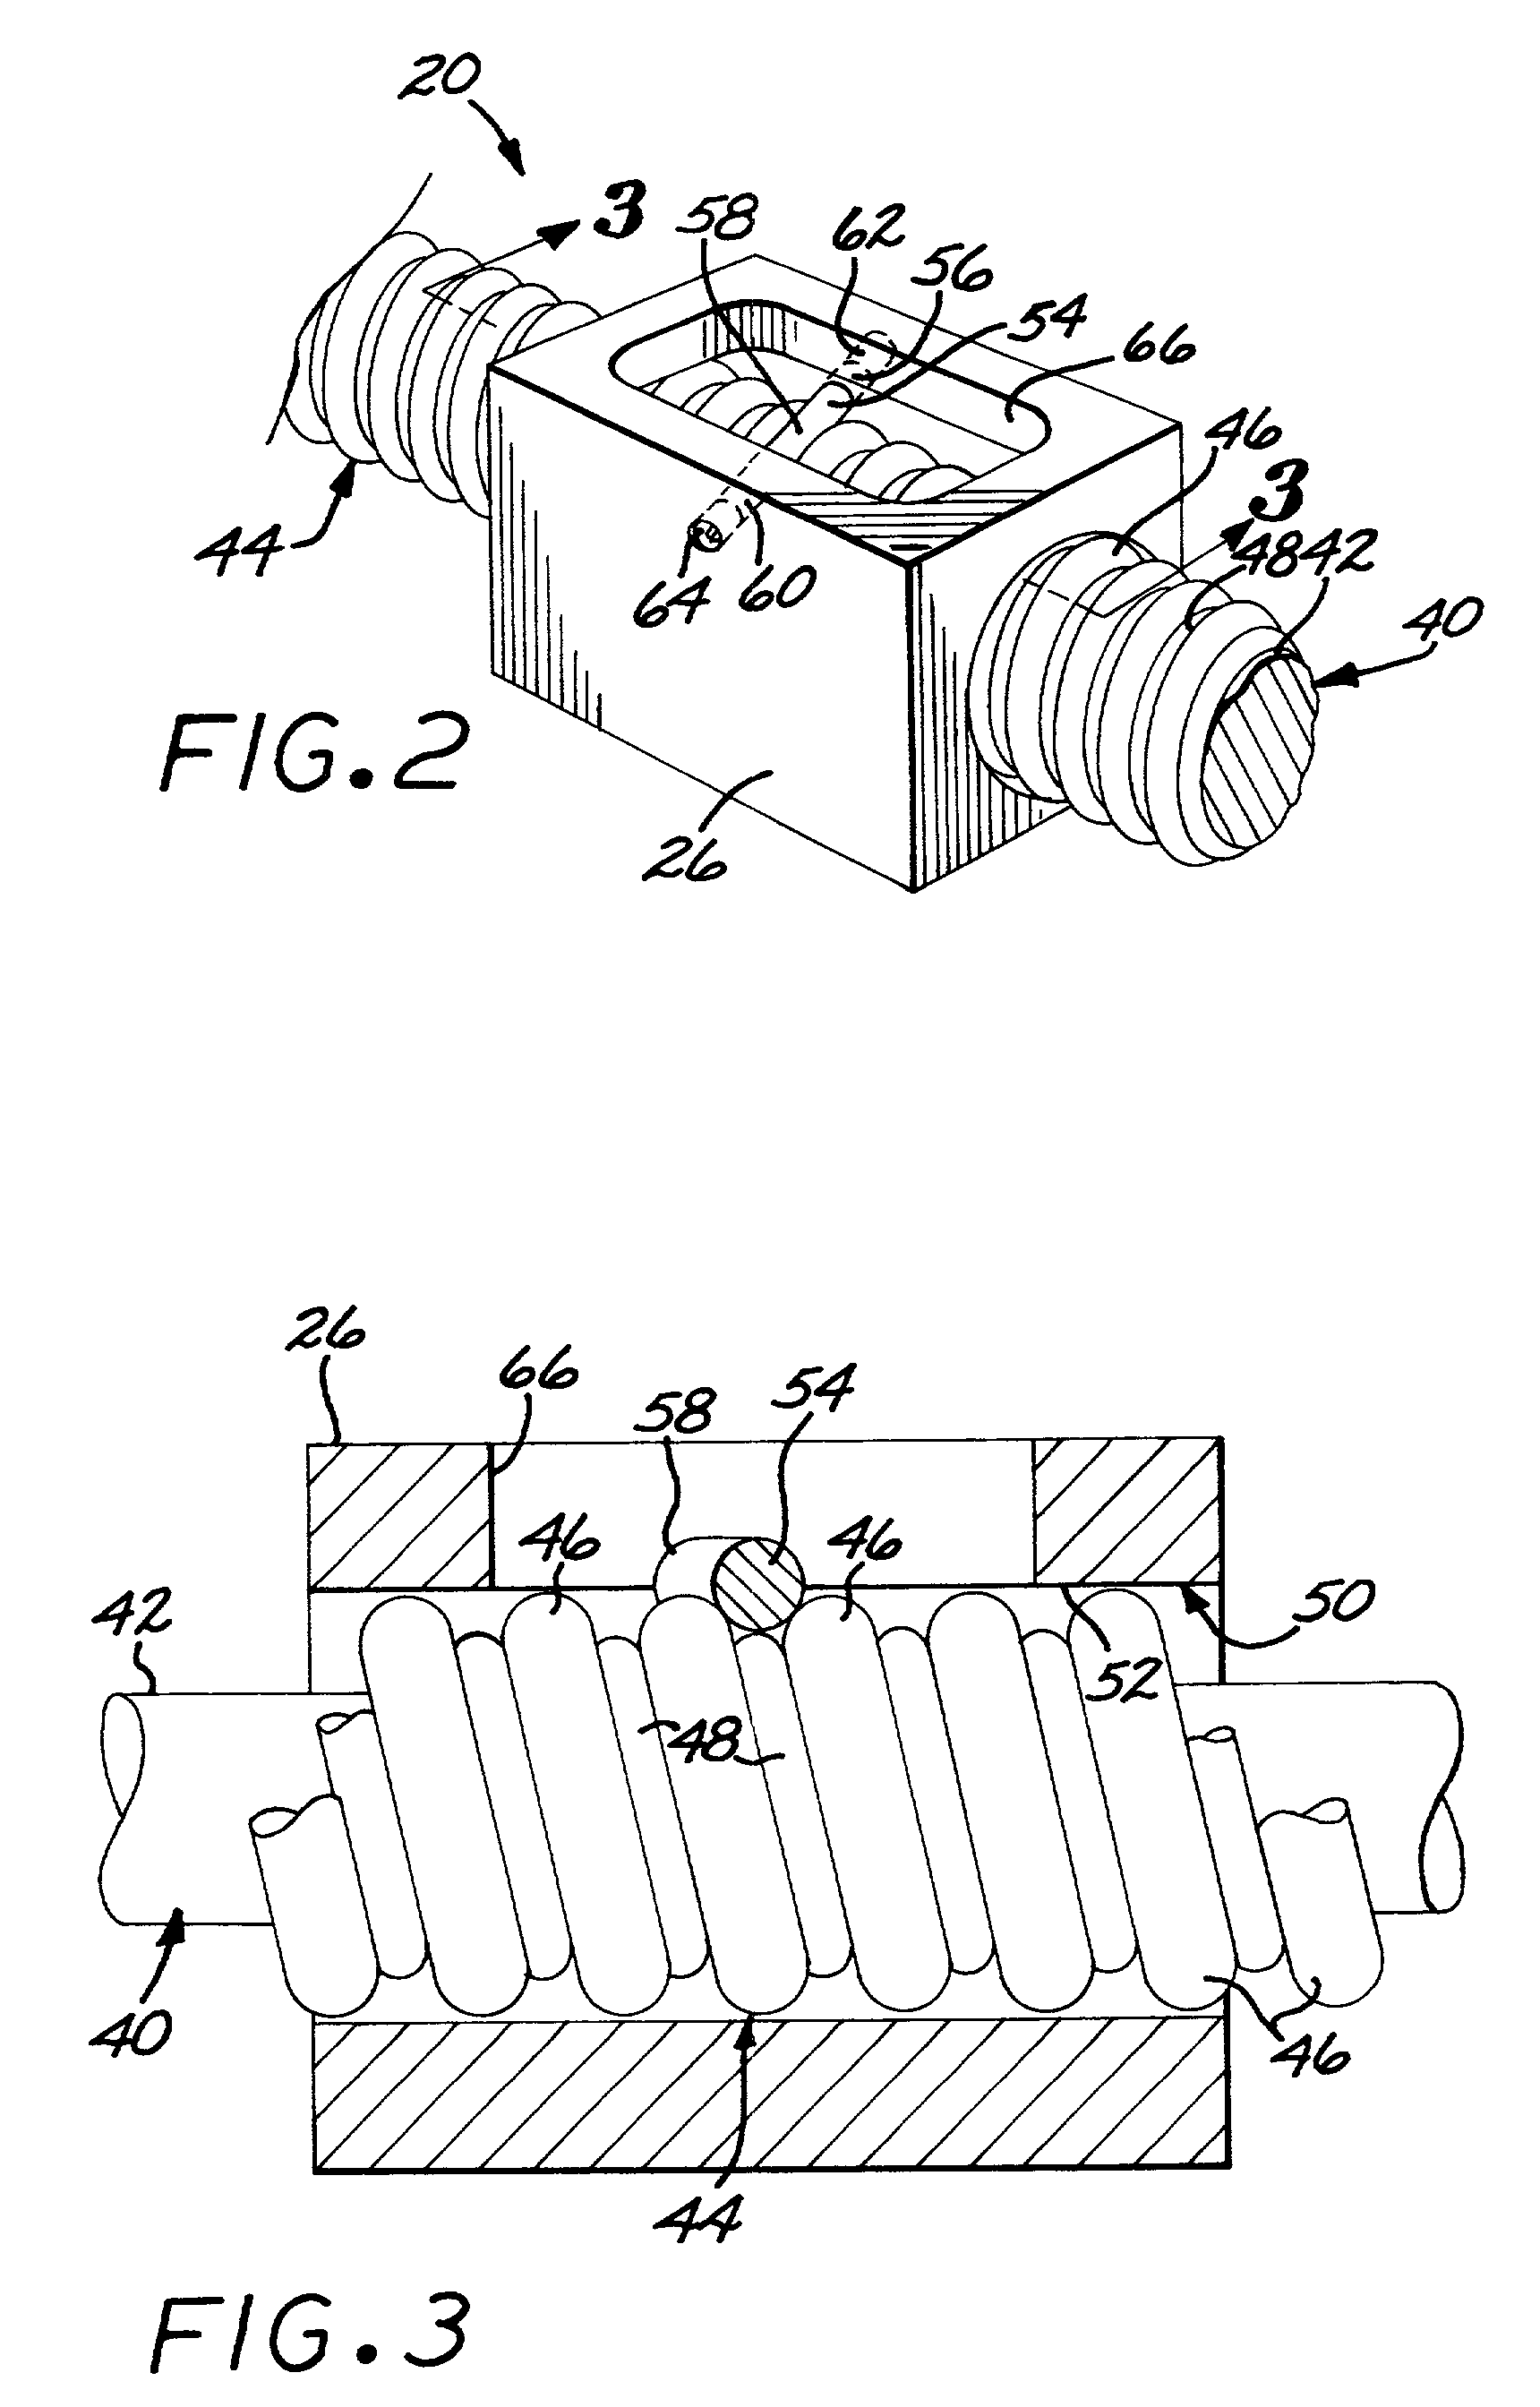 Leadscrew assembly with a wire-wound leadscrew and a spring-pin engagement of a drive nut to the leadscrew